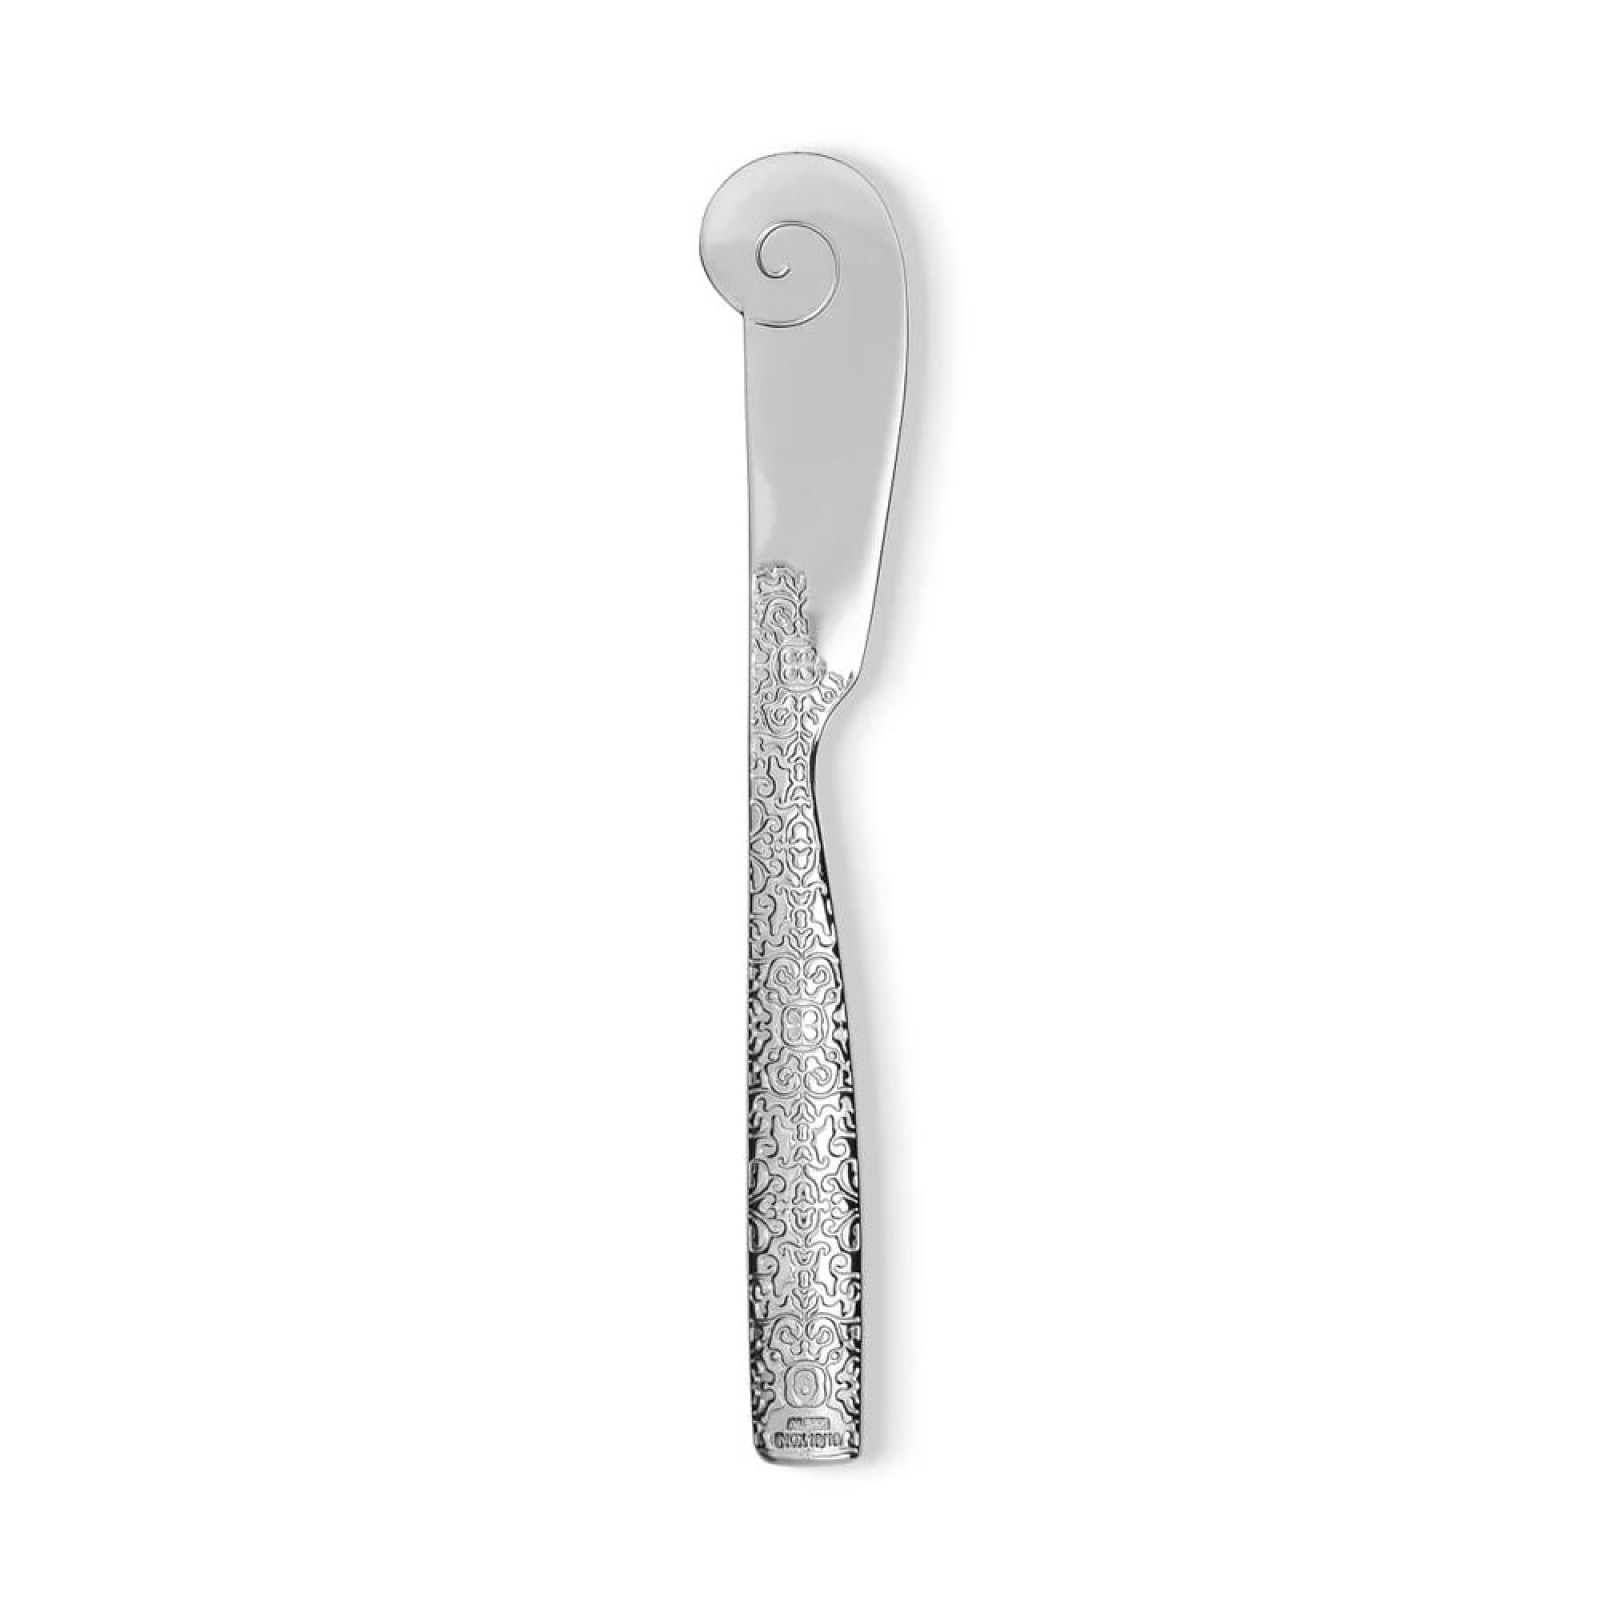 Dressed Butter Knife (Stainless steel) - Alessi